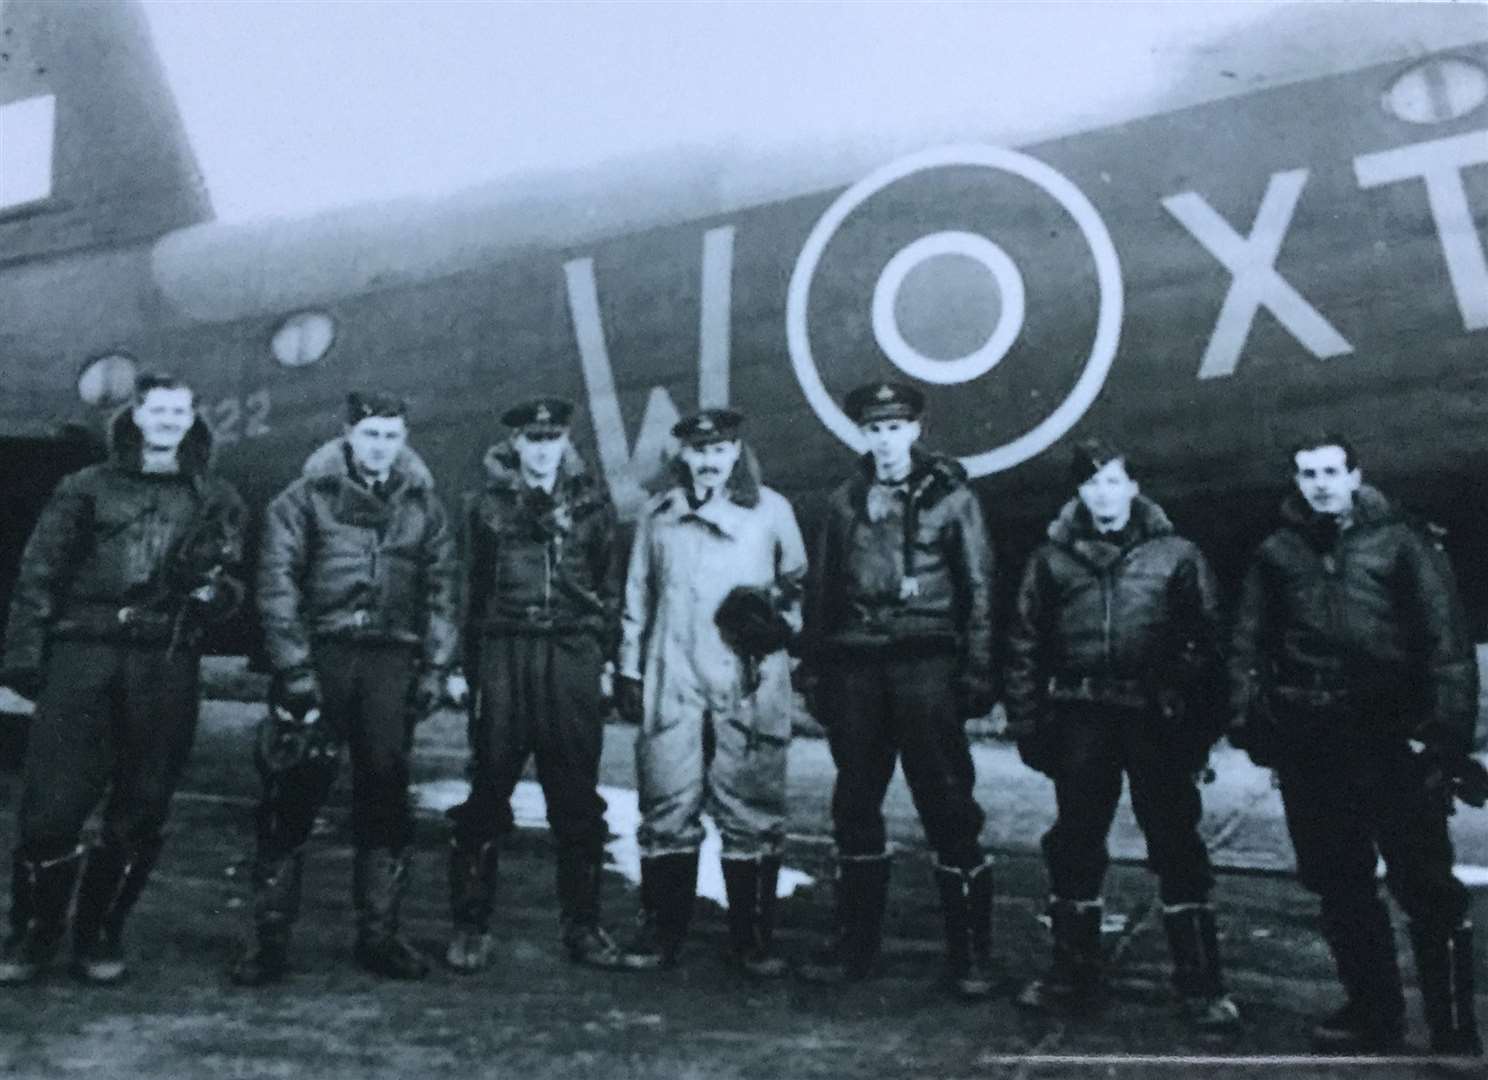 The seven crew members of the Short Stirling Bomber, including Sgt Leonard Shrubsall, who was 30 and from Iwade